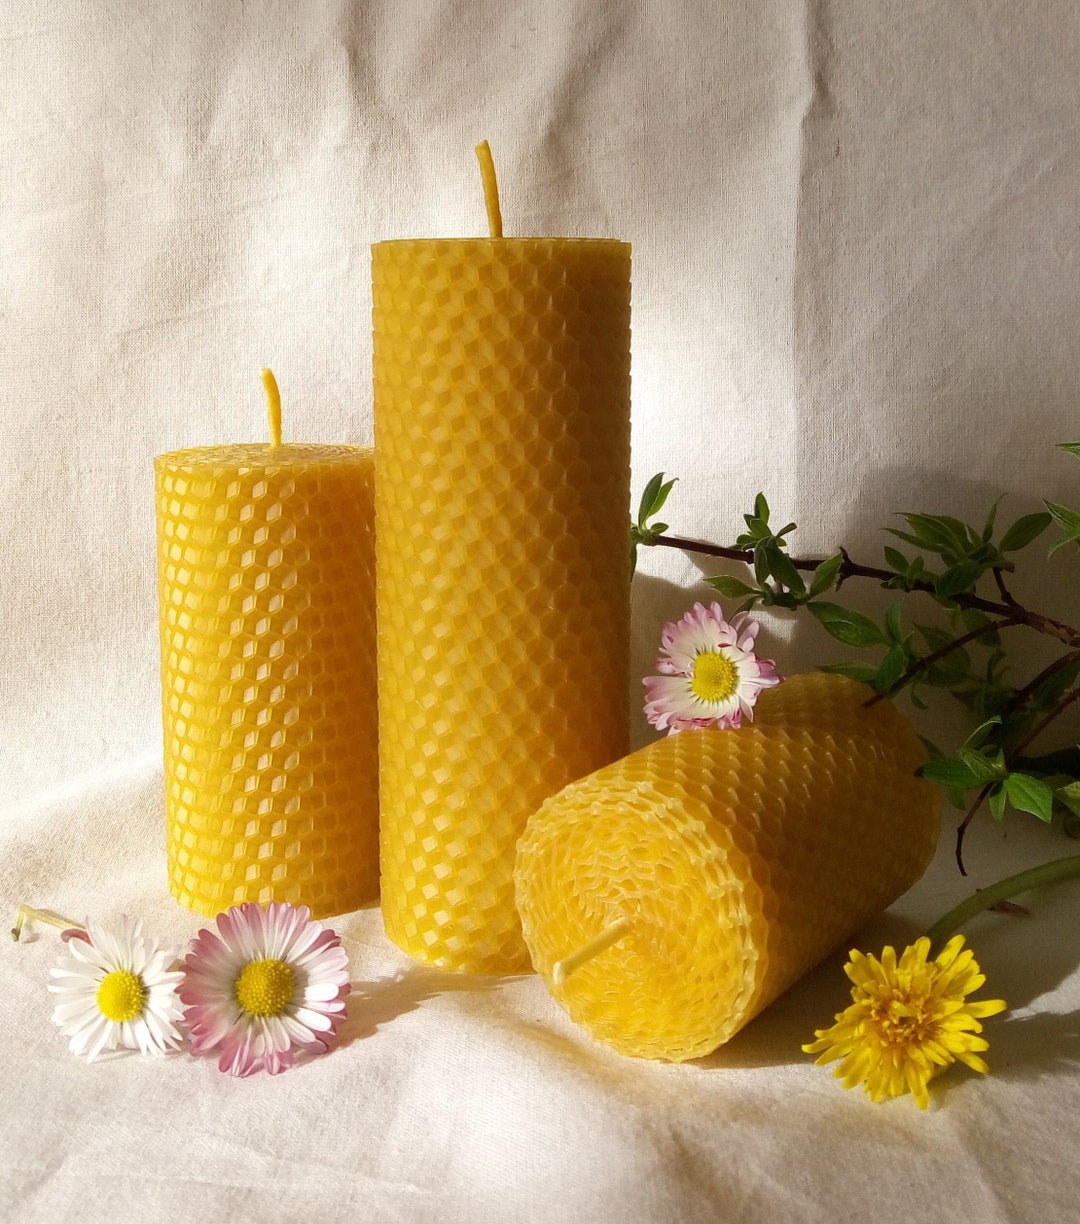  Bee Hive Candles 100% Pure Beeswax Pillar Candle (2 x 4) :  Home & Kitchen